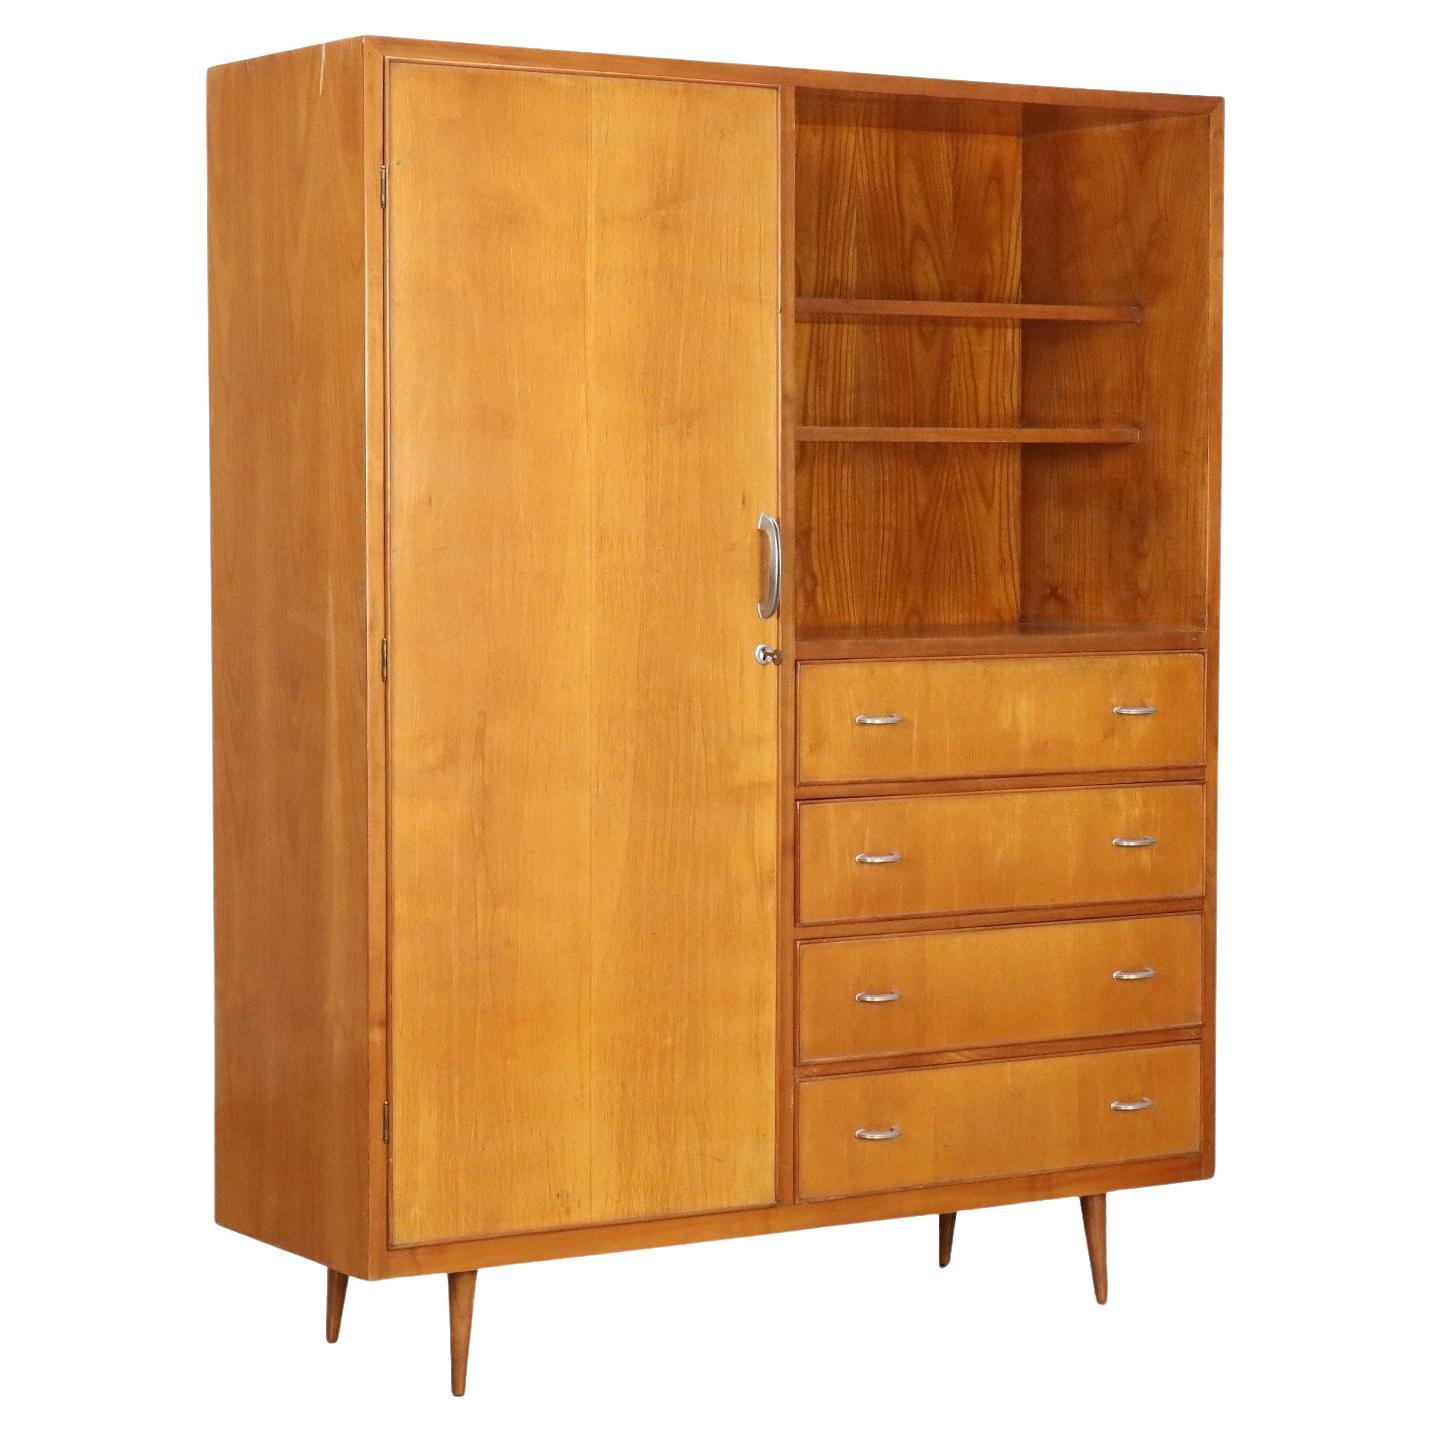 50s-60s Furniture For Sale